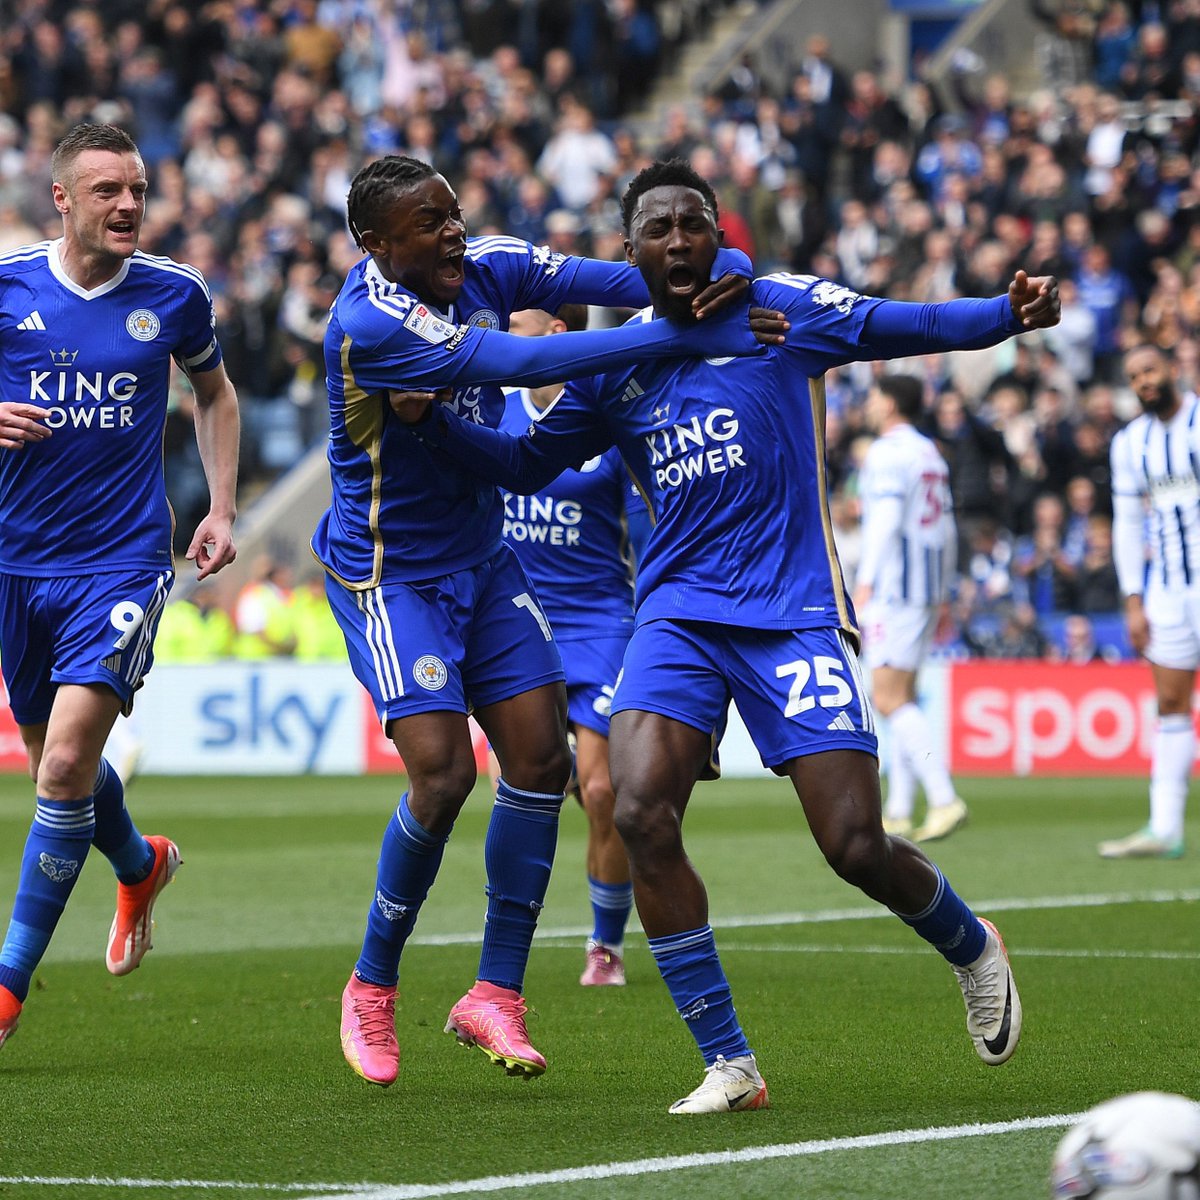 Wilfred Ndidi scores the opener for Leicester City in their important home win over Josh Maja (8 mins) & West Brom.

#LEIWBA